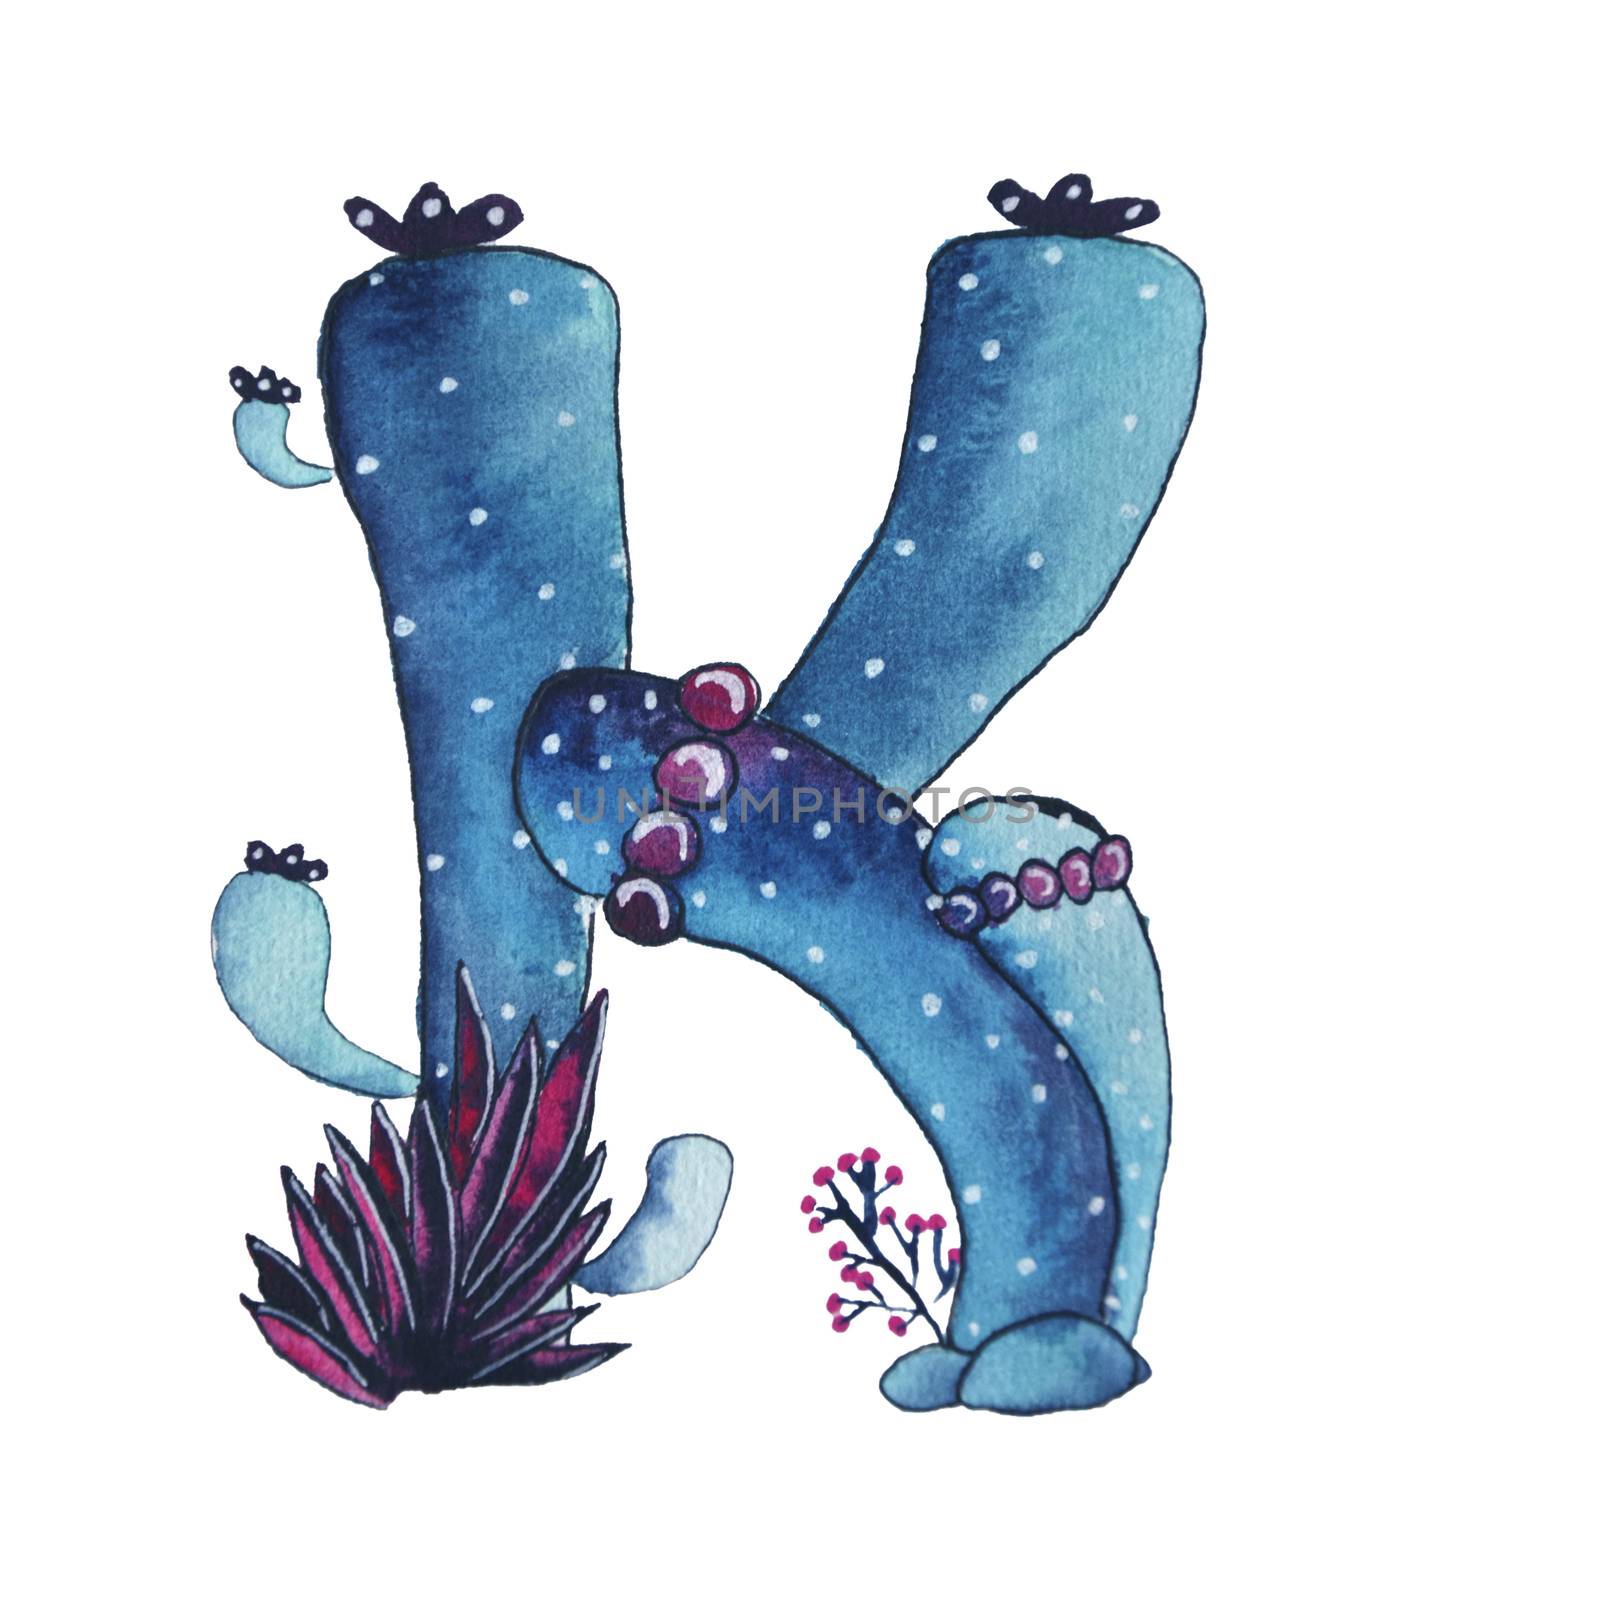 K letter in the form of cactus in blue colors, green eco English letter Illustration on a white background, watercolor illustration